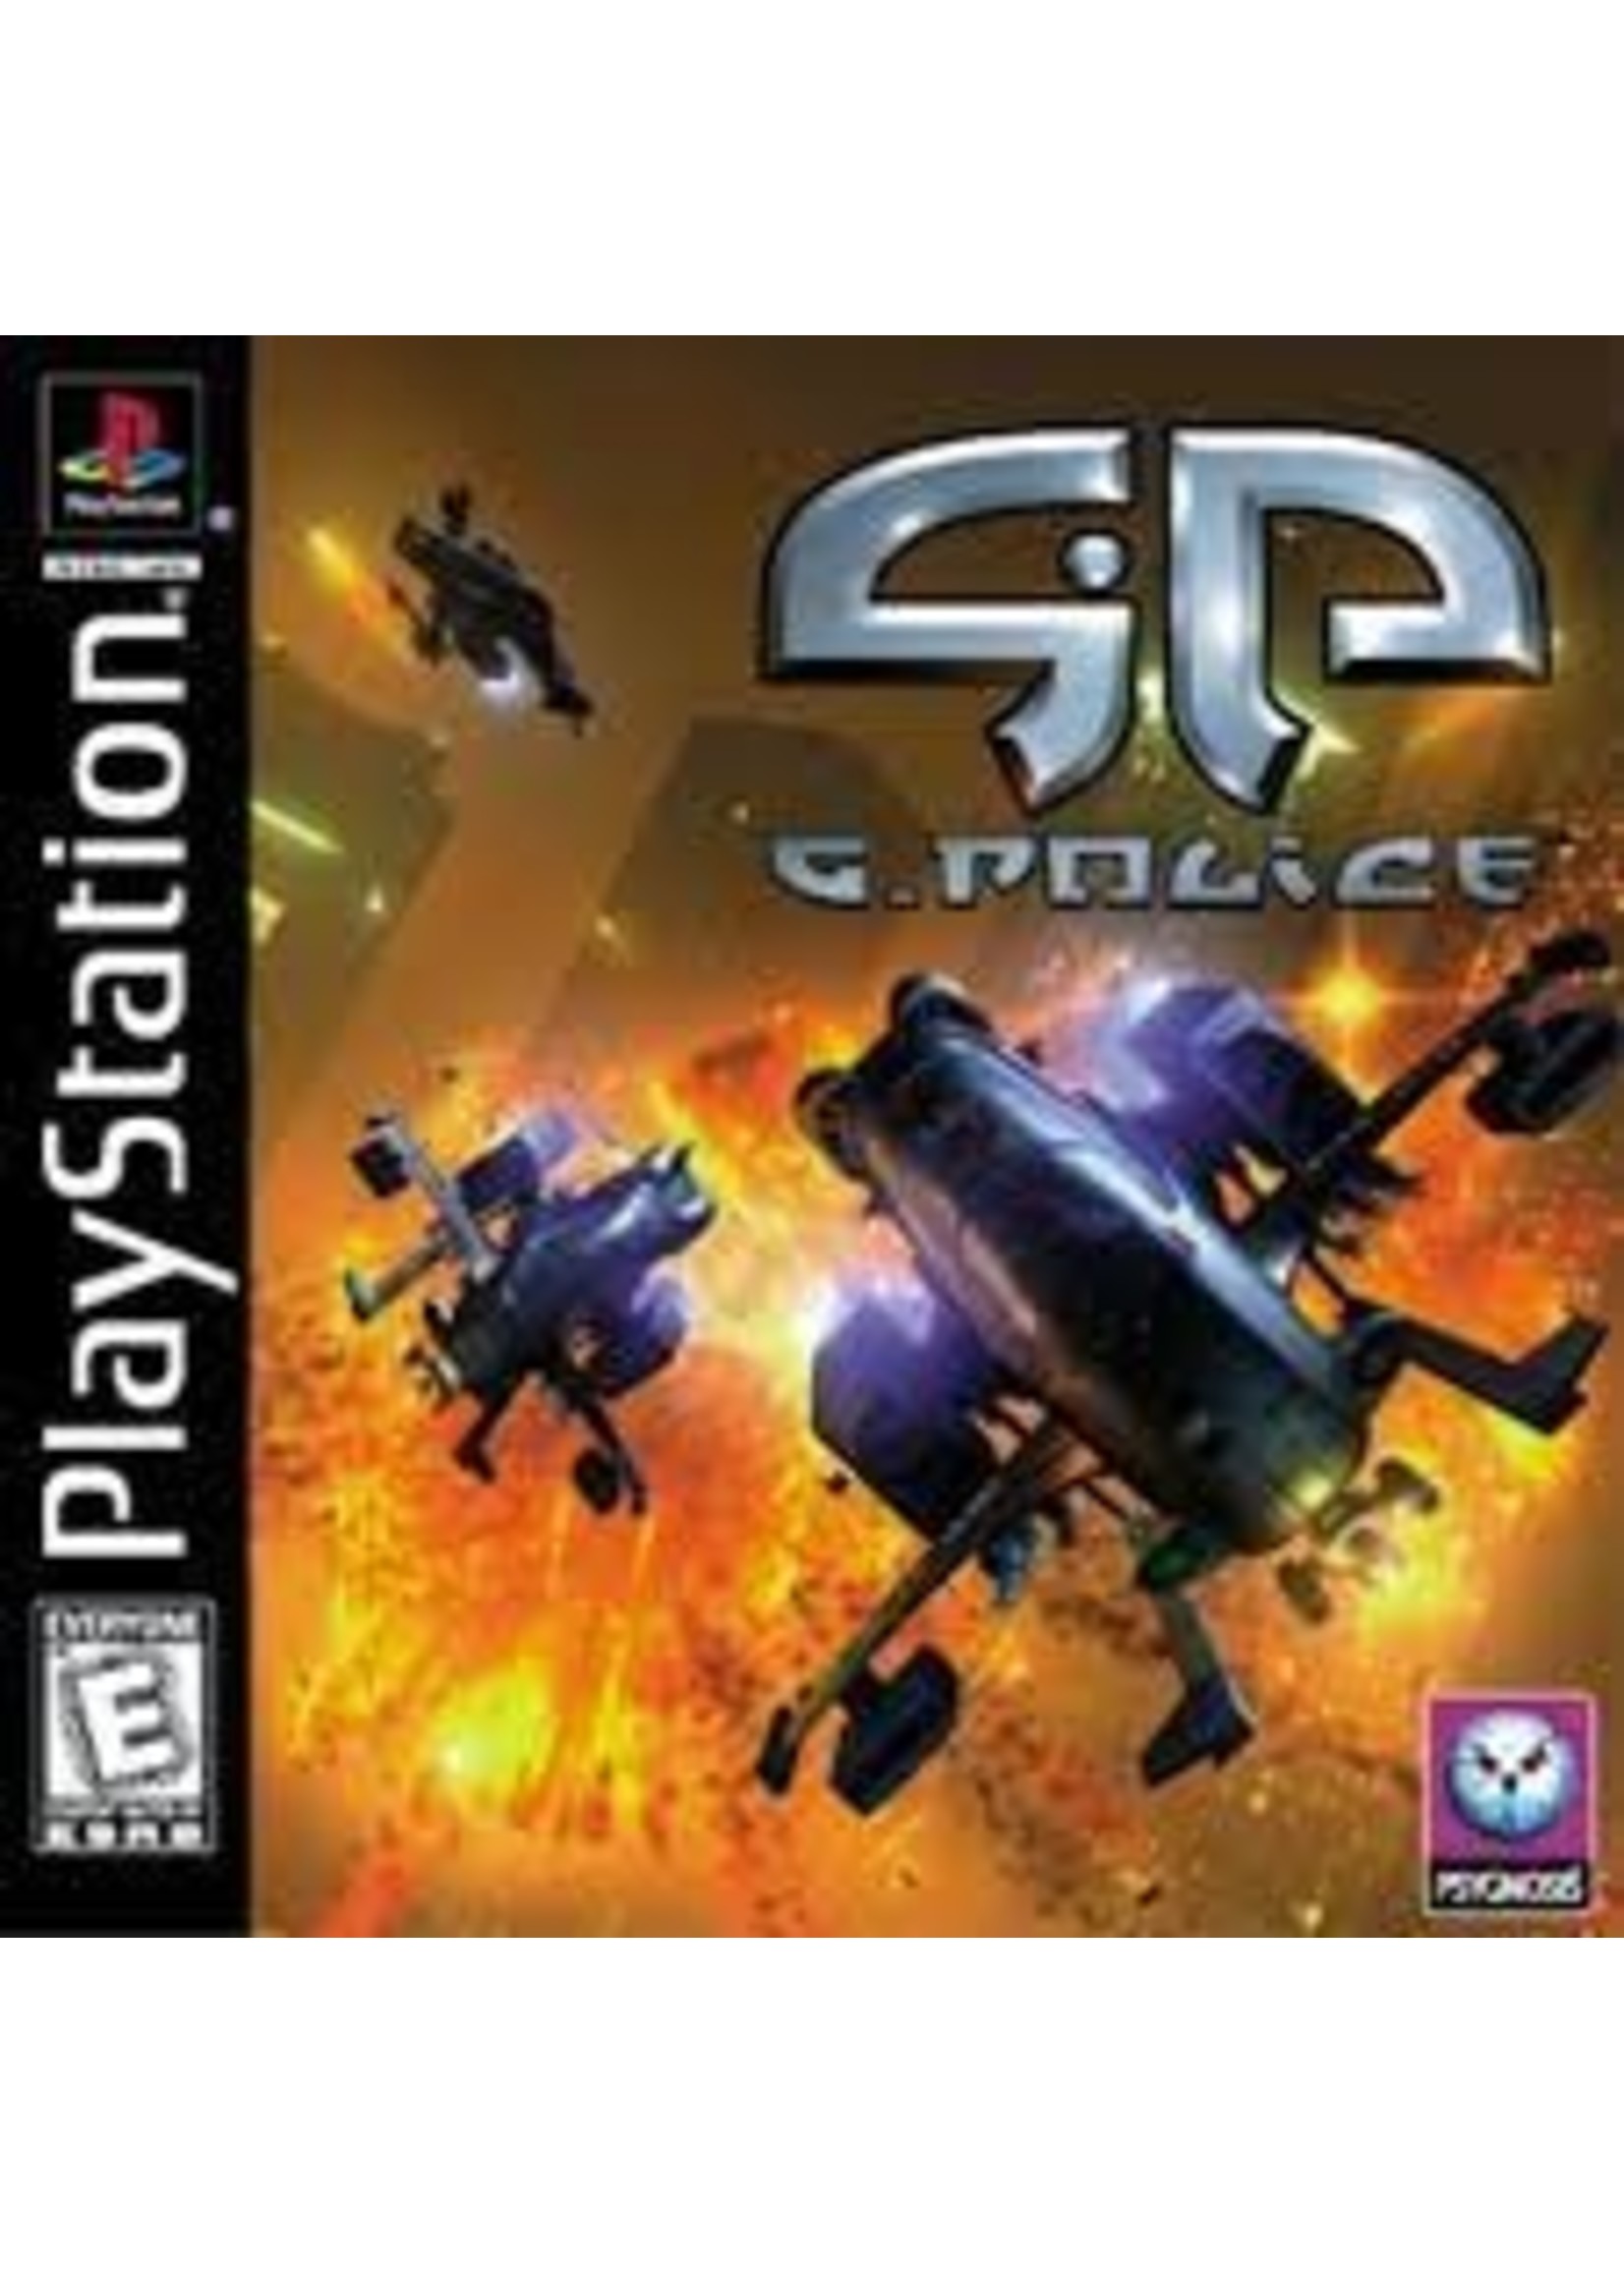 Sony Playstation 1 (PS1) G-Police